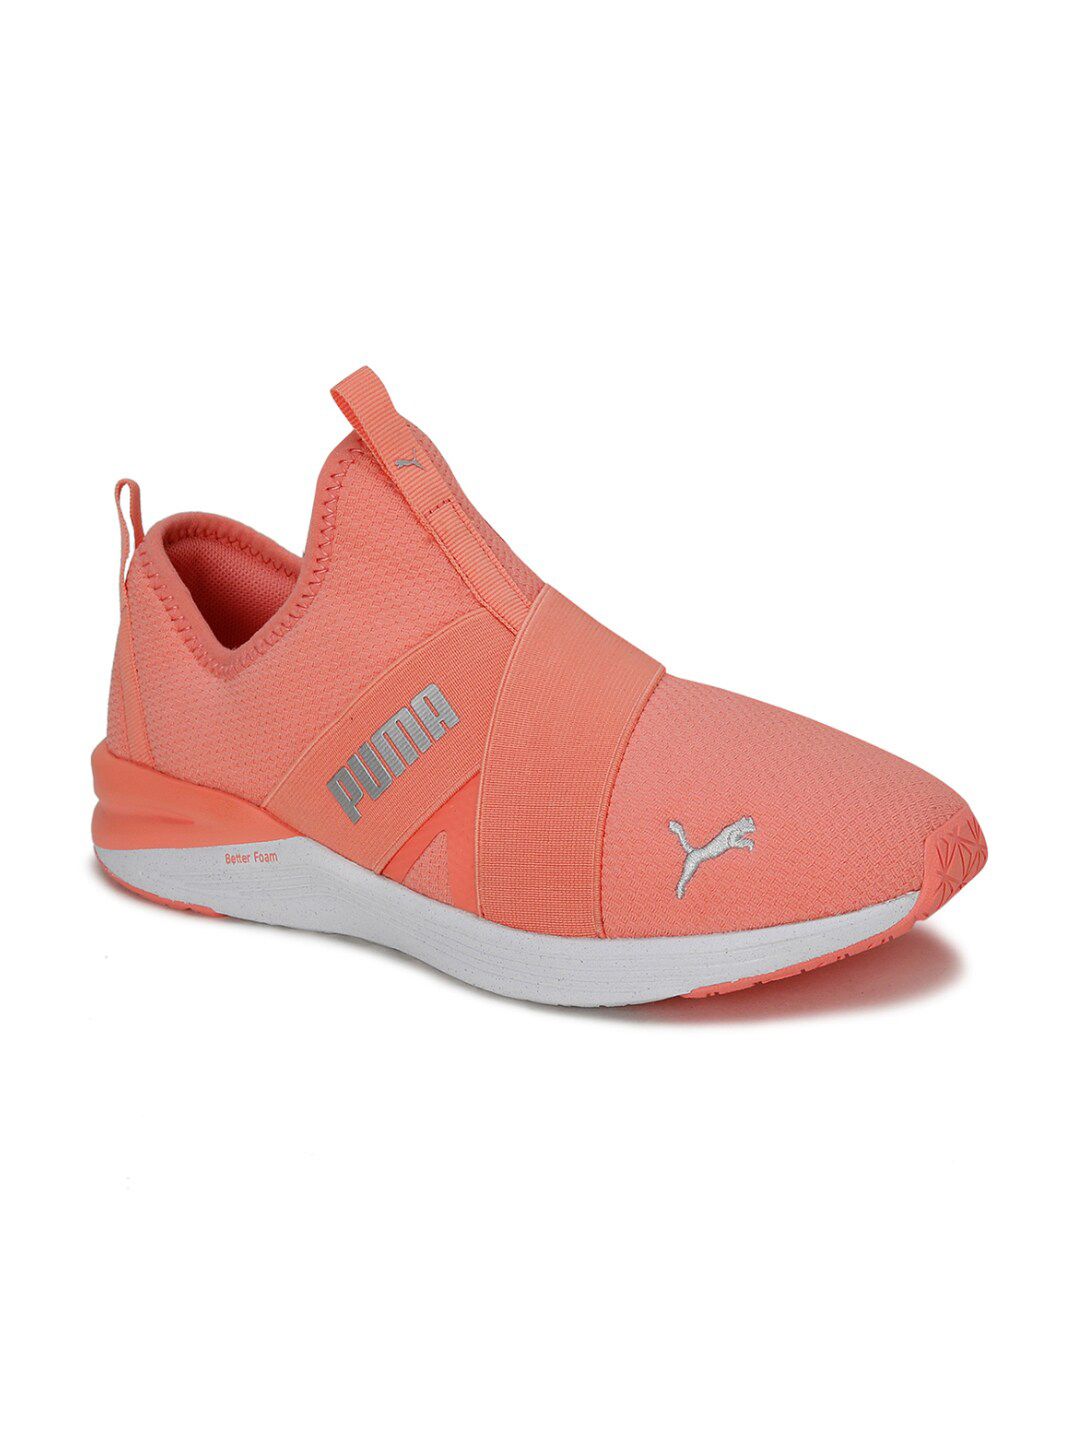 Puma Women Pink Slip-On Women's Shoes Price in India